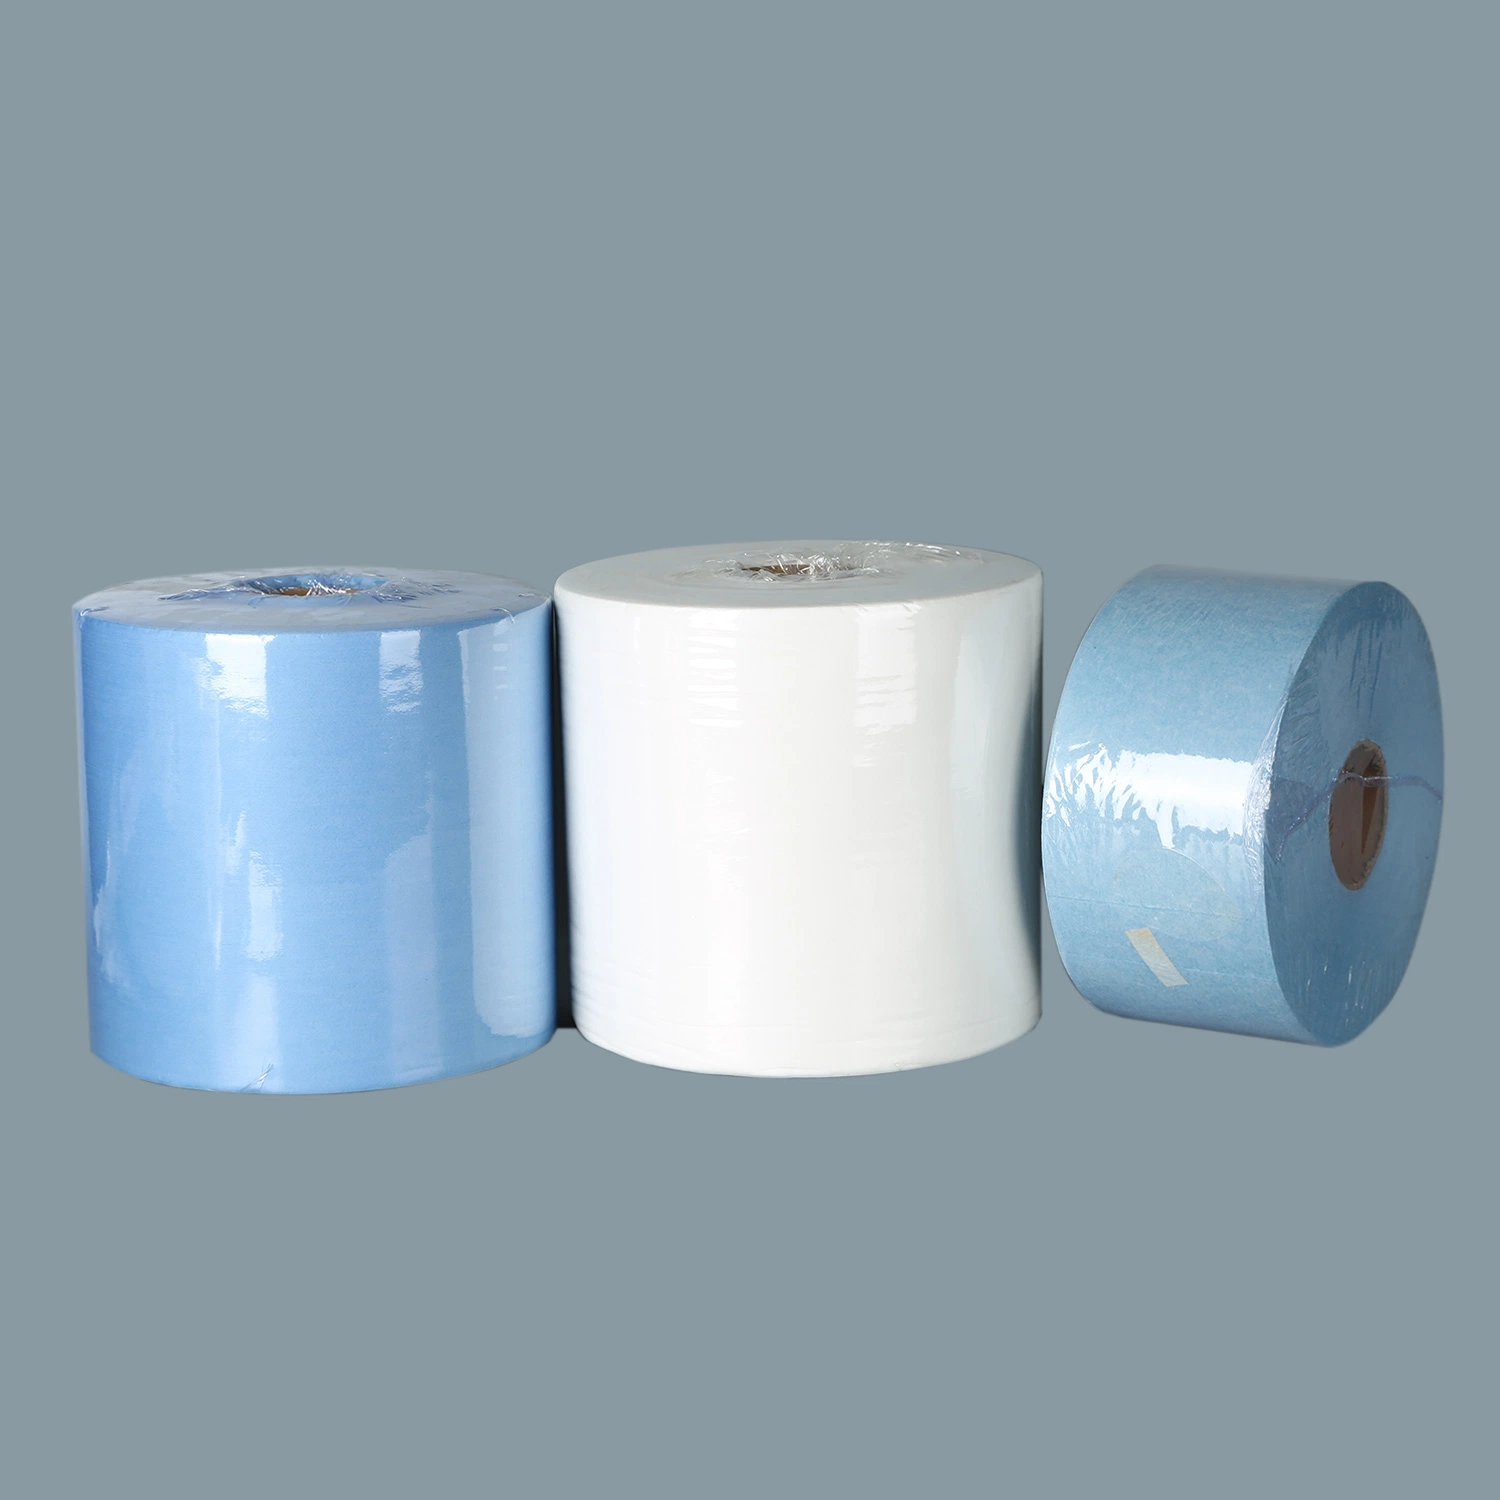 Lint Free Roll Blue for Workshop Cleanroom Wiper Cleaning Wipe